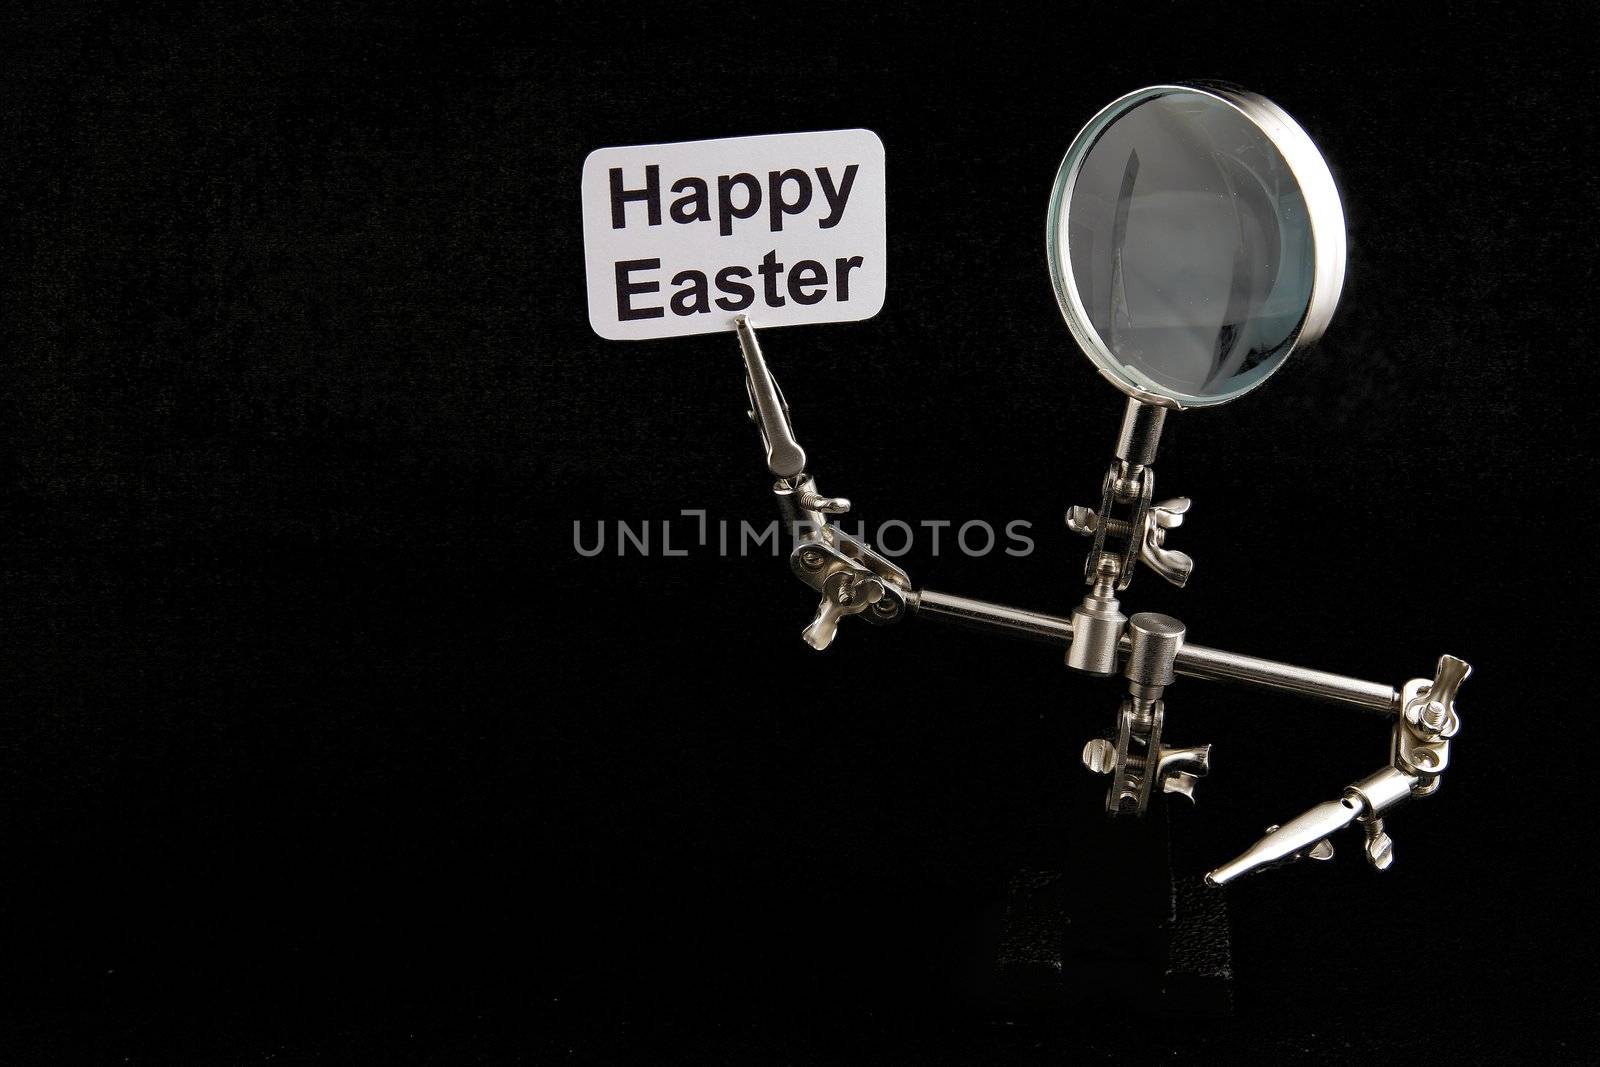 figure of steel man with "Happy Easter" inscription on black background